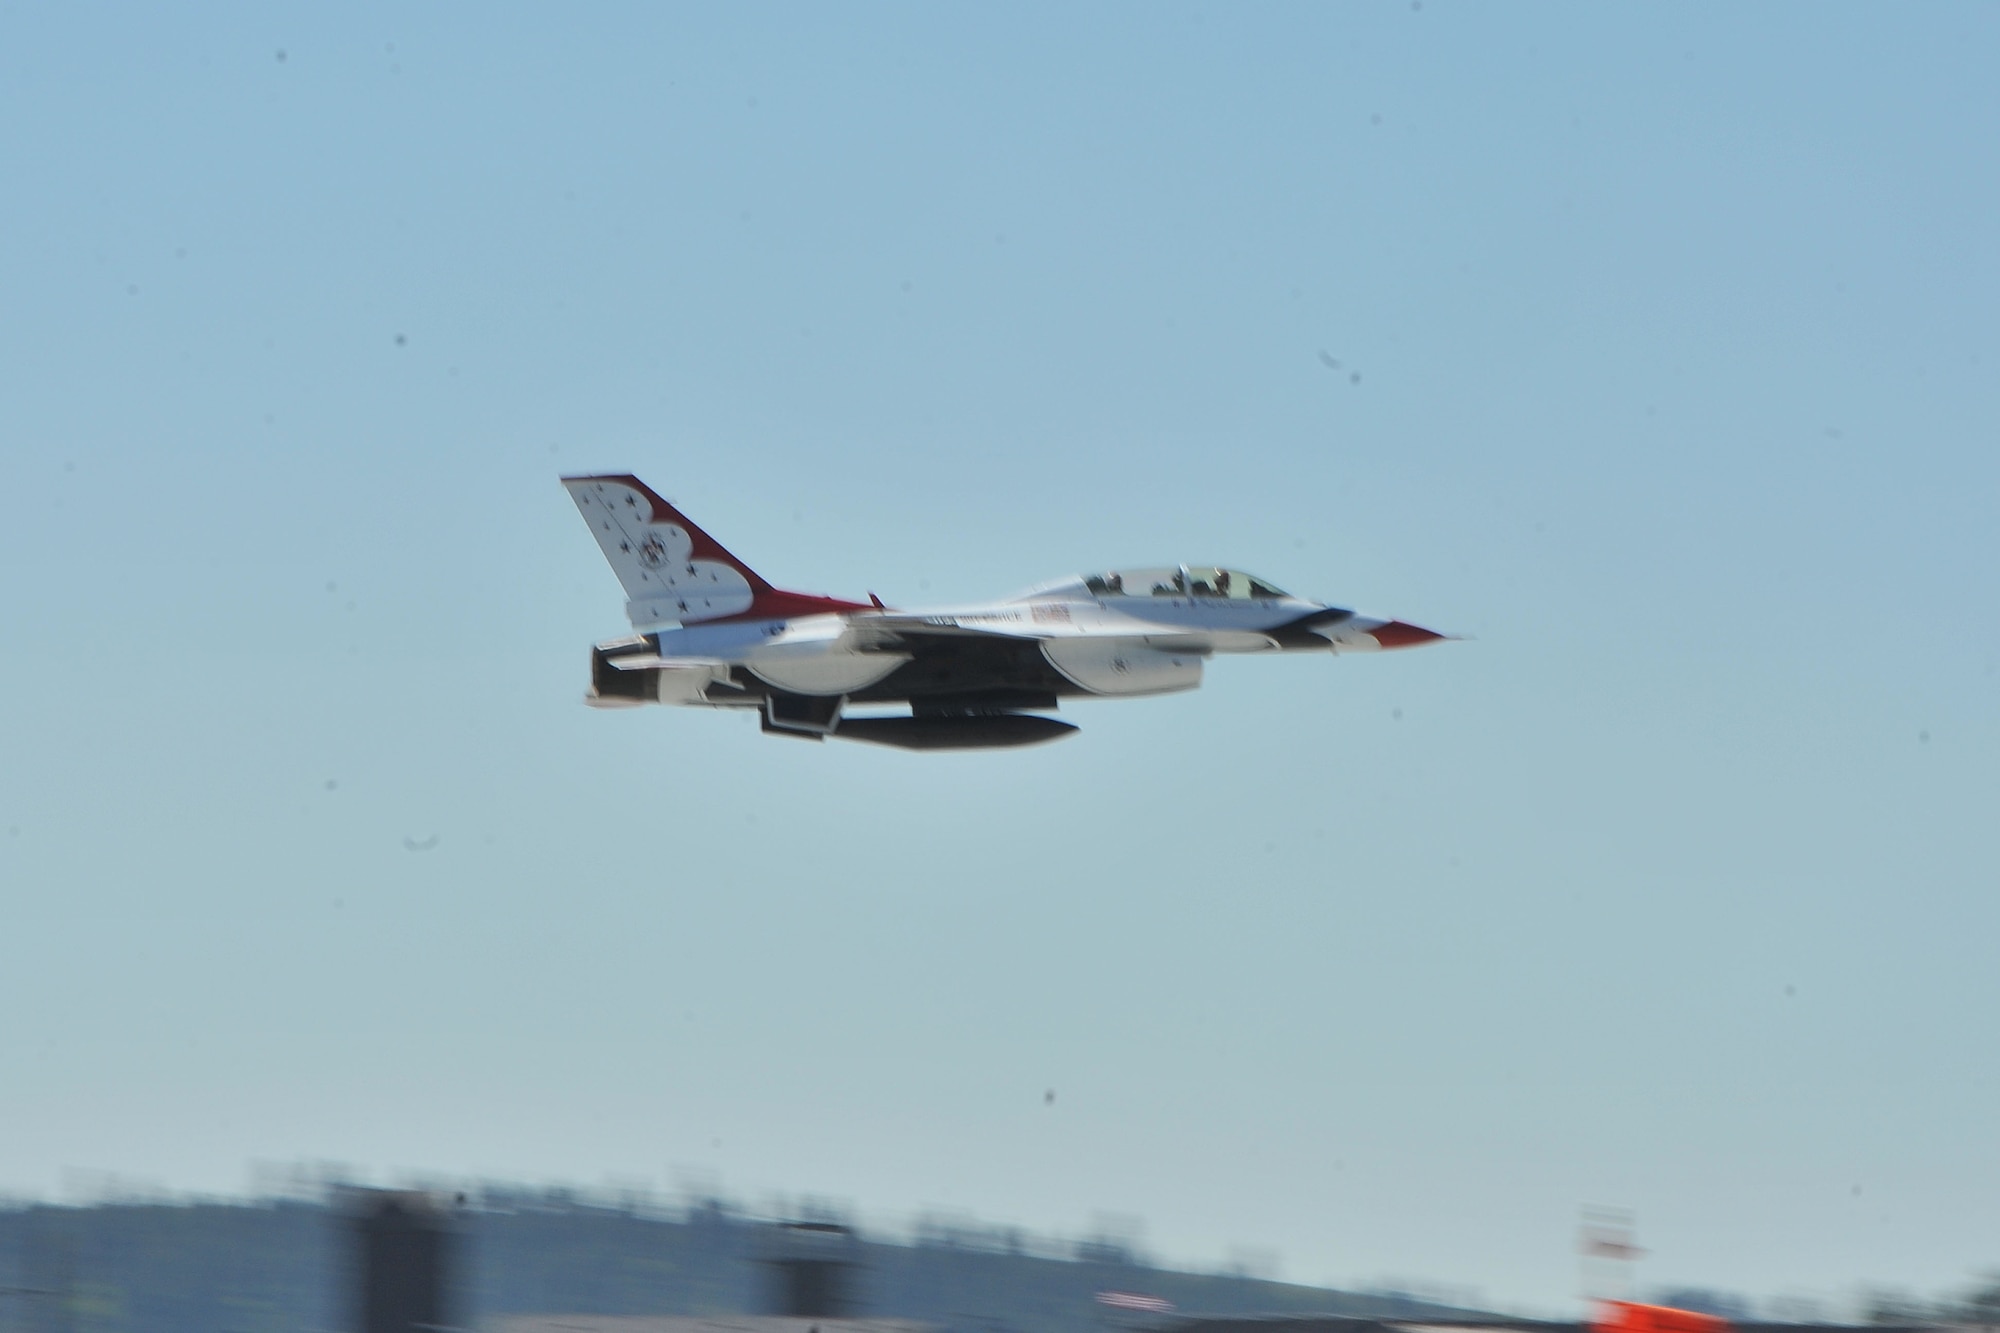 The U.S. Air Force Thunderbirds F-16 Fighting Falcon takes off from the flightline at Fairchild Air Force Base, Wash., May 30, 2014.  The flight was an orientation flight for Robyn Nance, KXLY news anchor, the day prior to SkyFest 2014.  (U.S. Air Force photo by Staff Sgt. Veronica Montes)